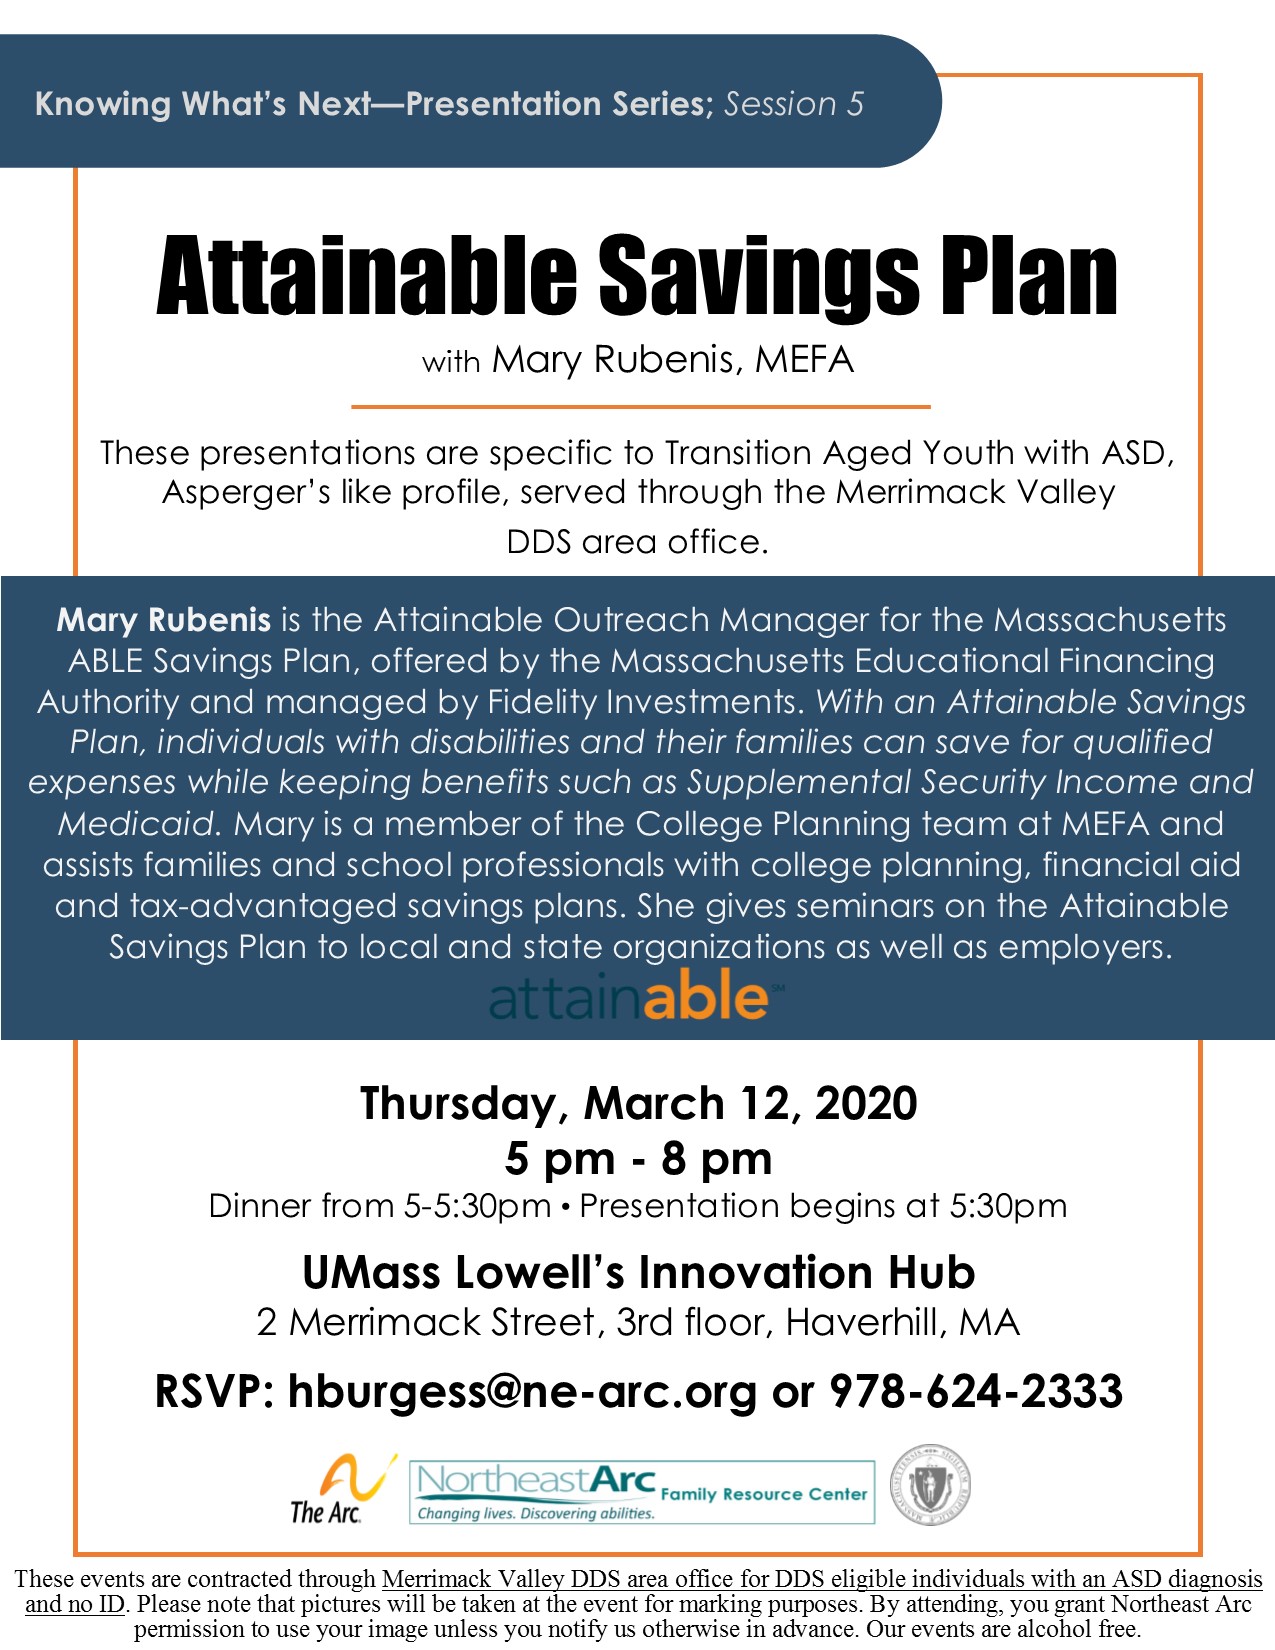 Attainable Savings Plan Presentation for Merrimack Valley Families; March 12th at 5 pm, 2 Merrimack Street Haverhill MA